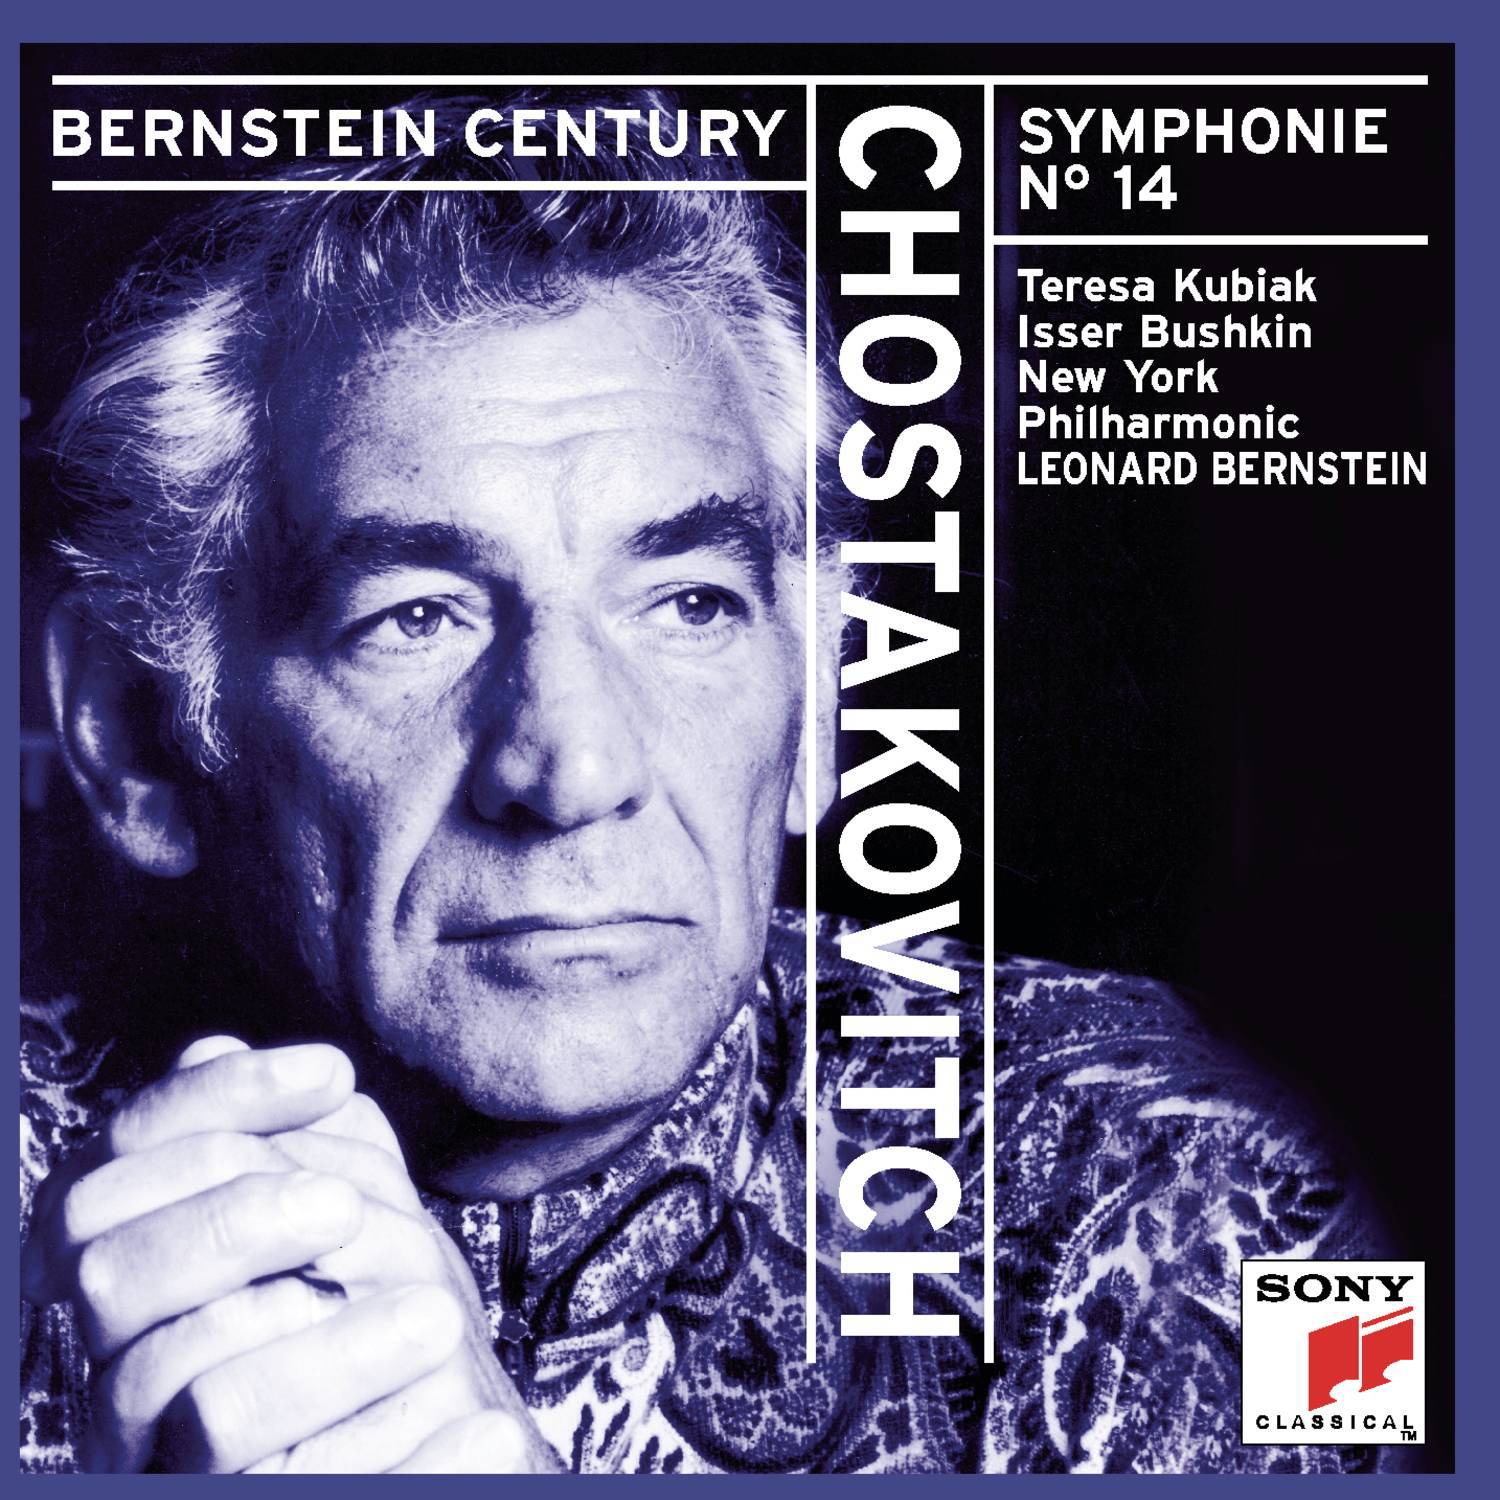 Symphony No. 14, Op. 135 for Soprano, Bass and Chamber Orchestra: IV. The Suicide. Adagio (Soprano)